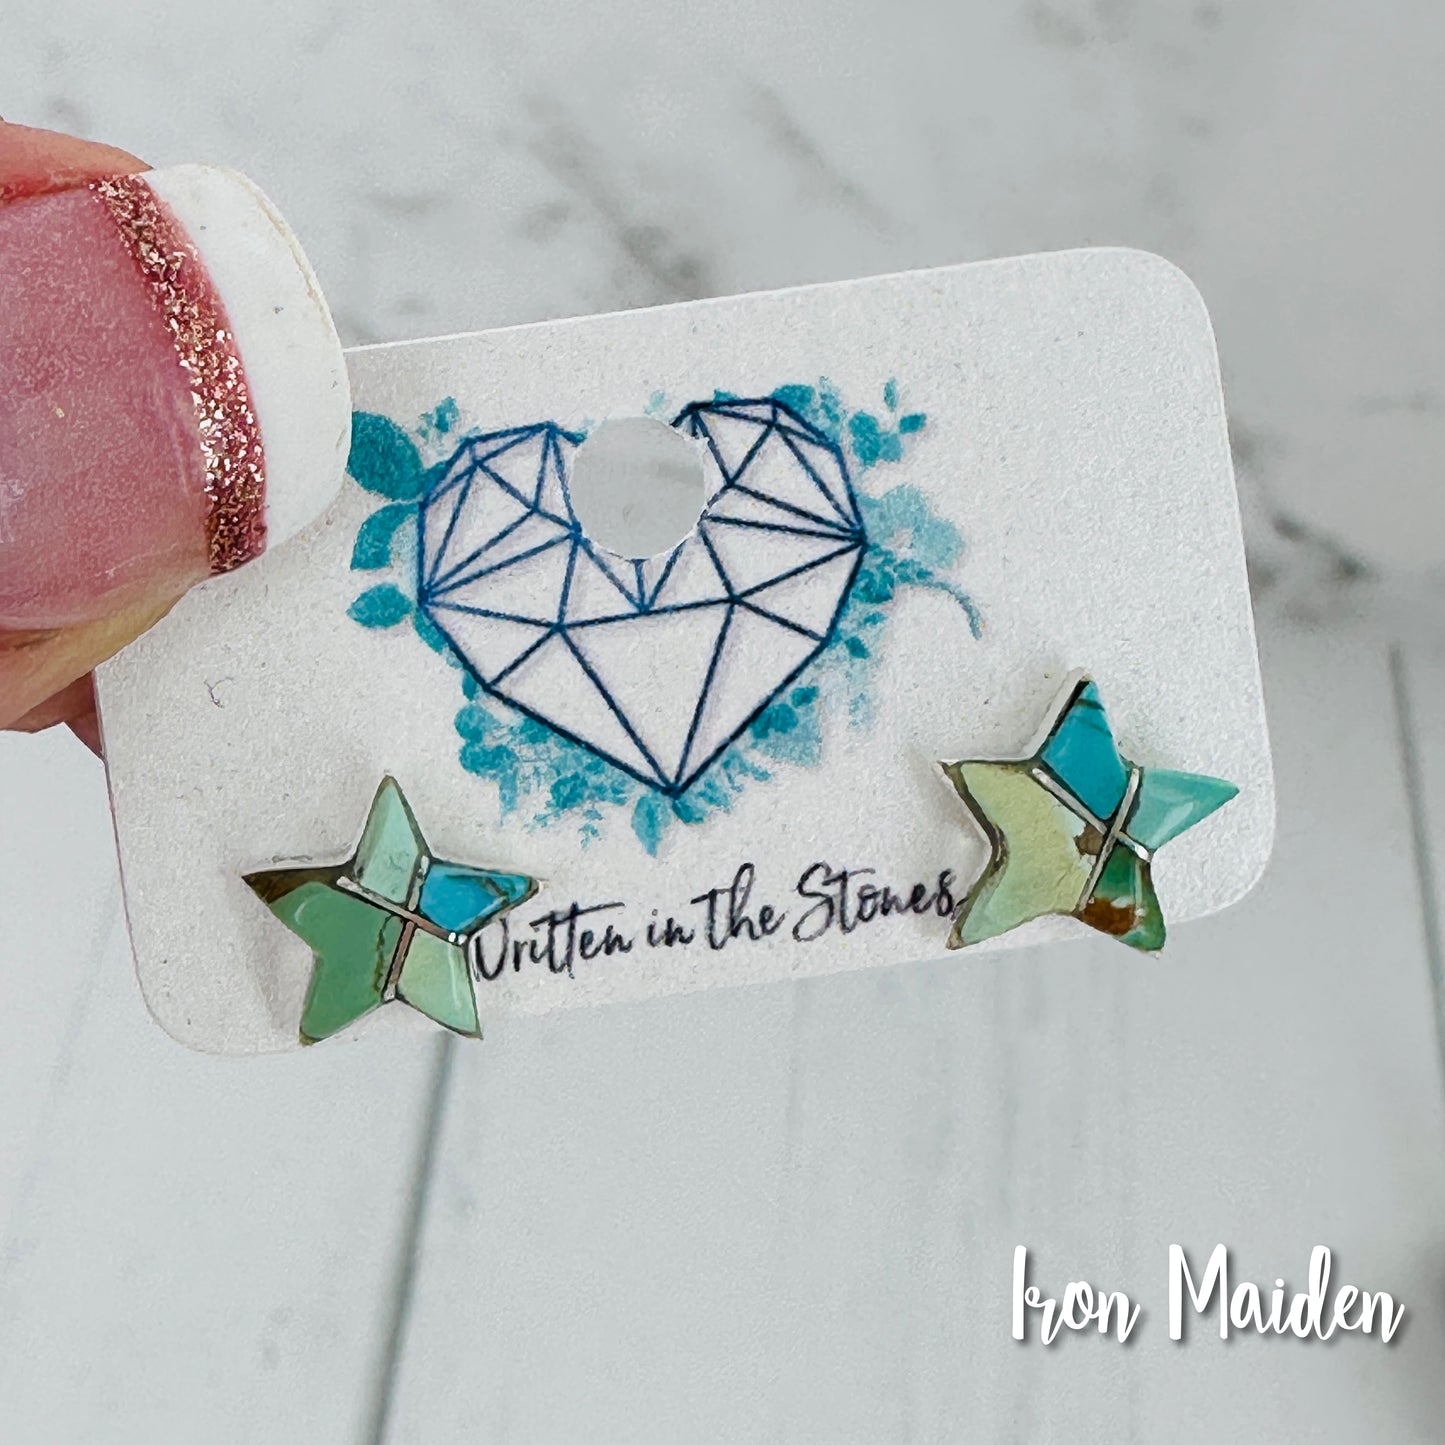 étoiles {small turquoise star earrings}